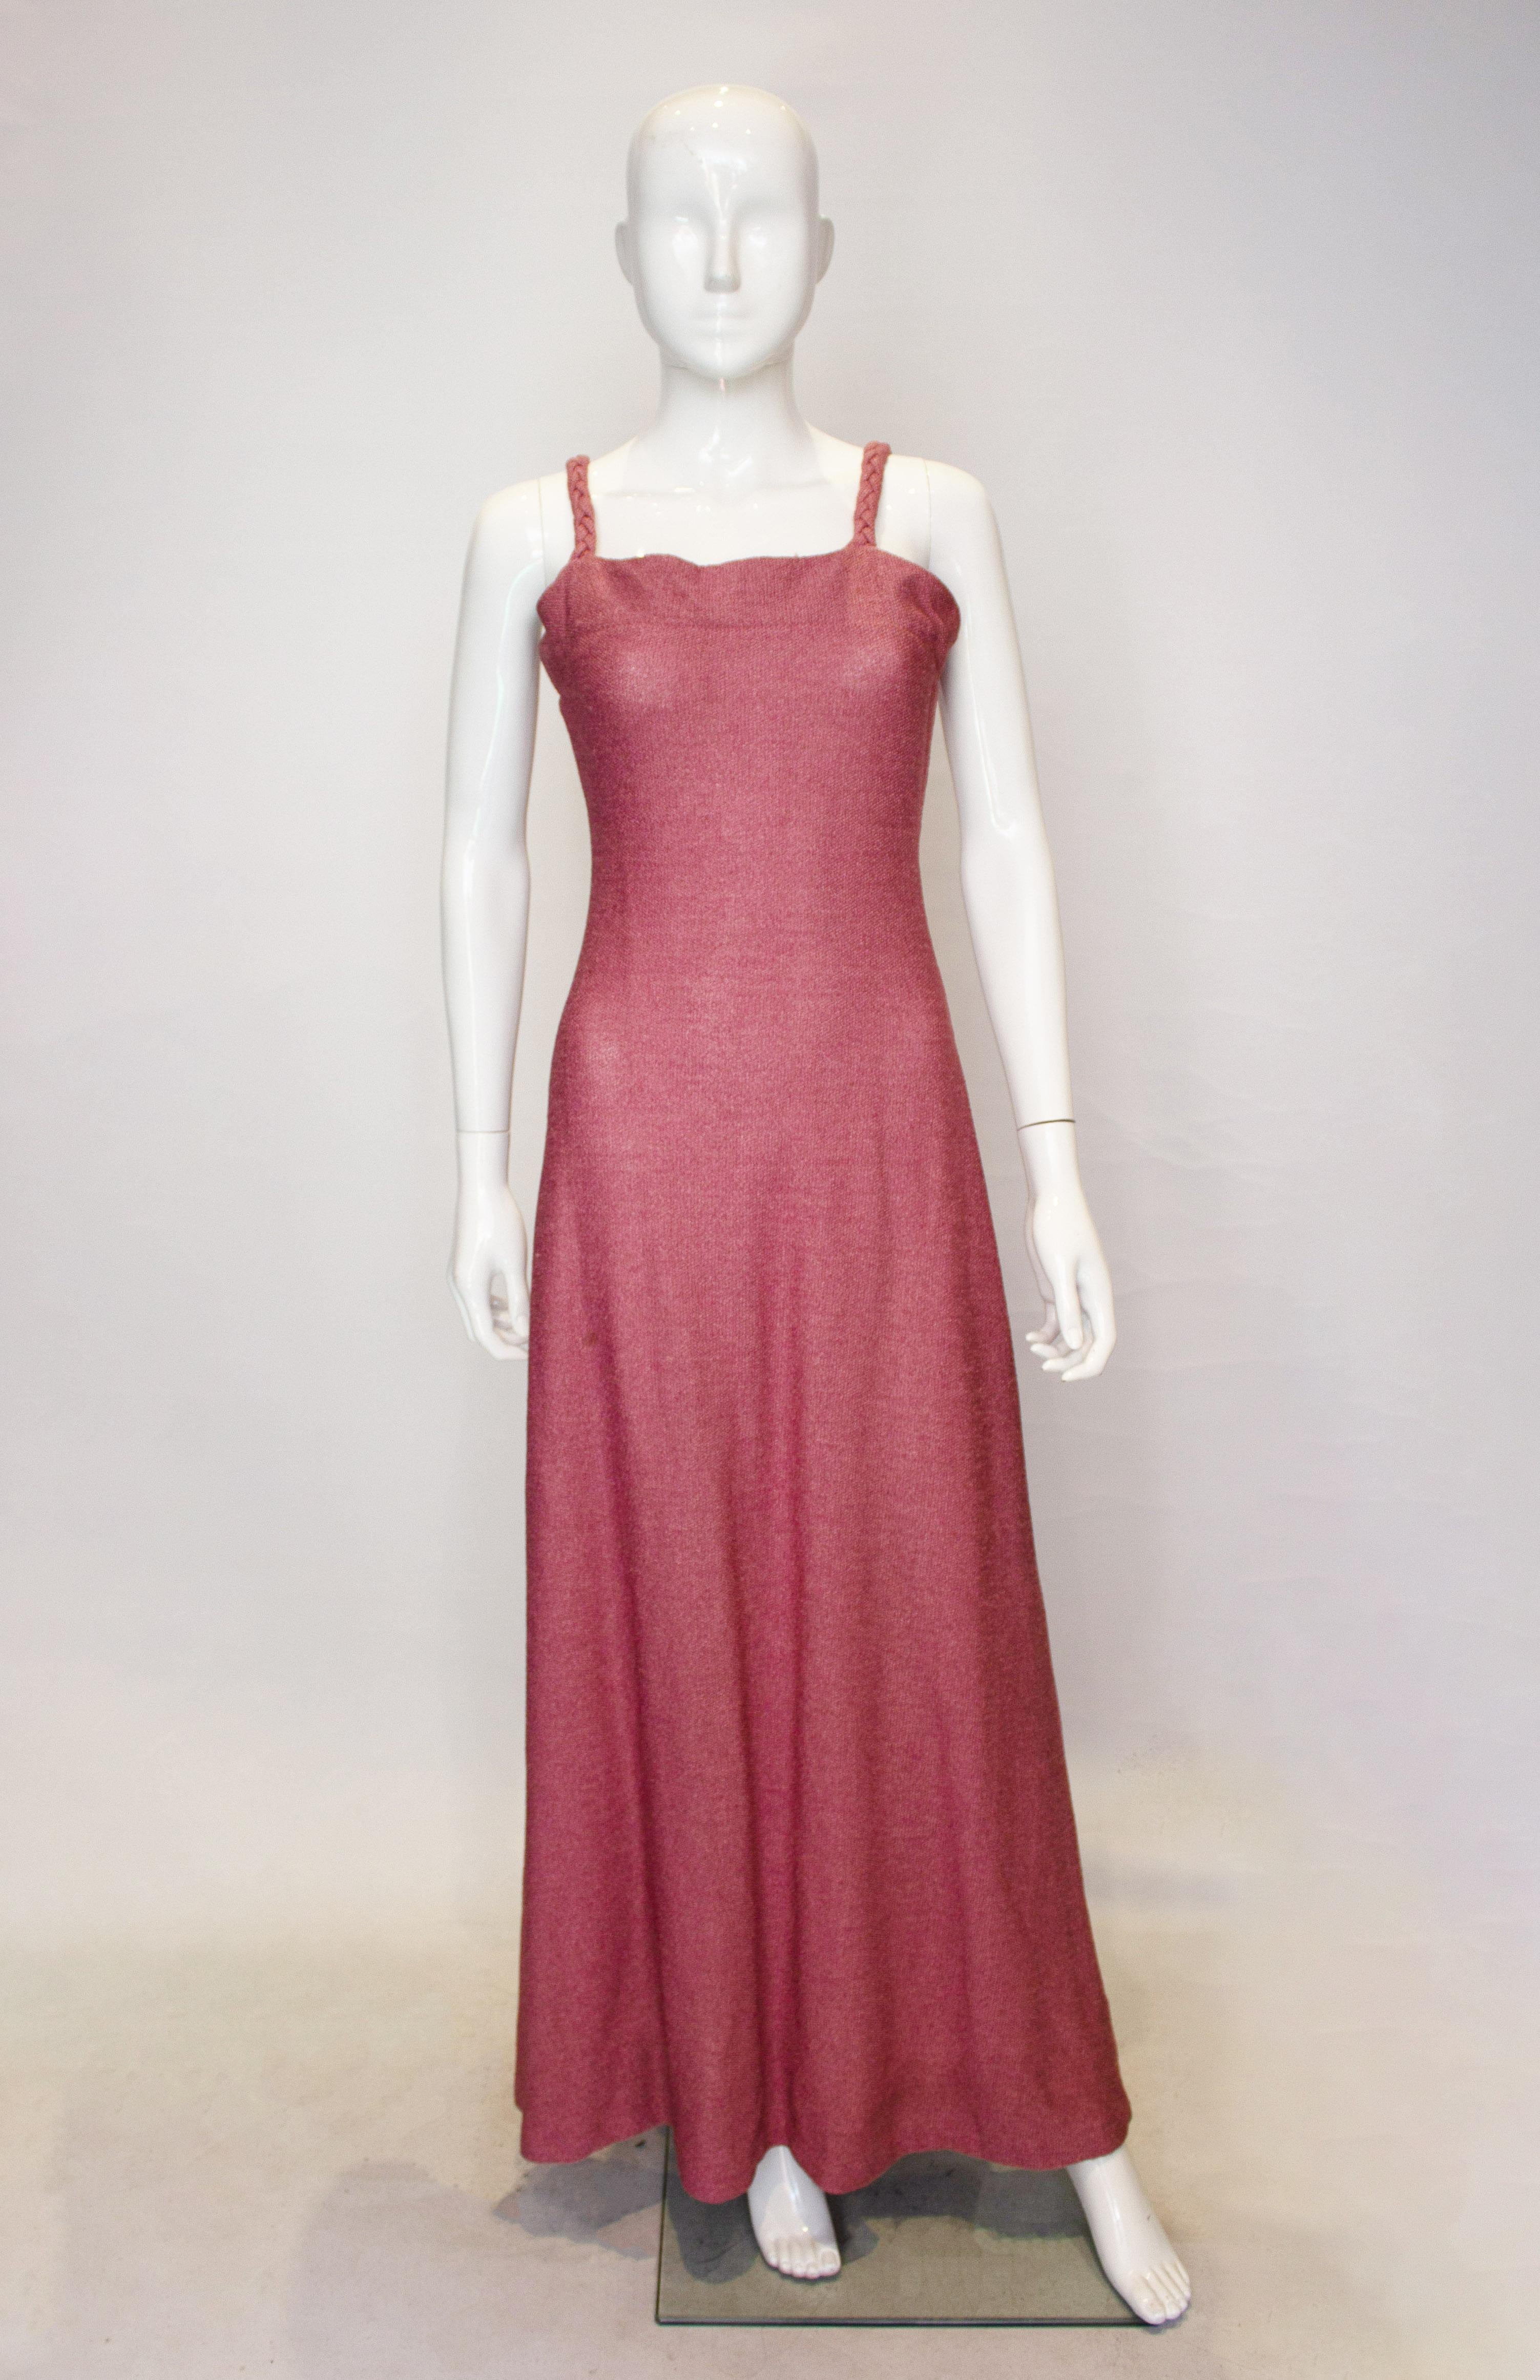 A pretty vintage dress in a raspberry pink knit. The dress has a central back zip, plaited shoulder straps and is A line. The fabric is quite a heavy knit and so hangs beautifully.